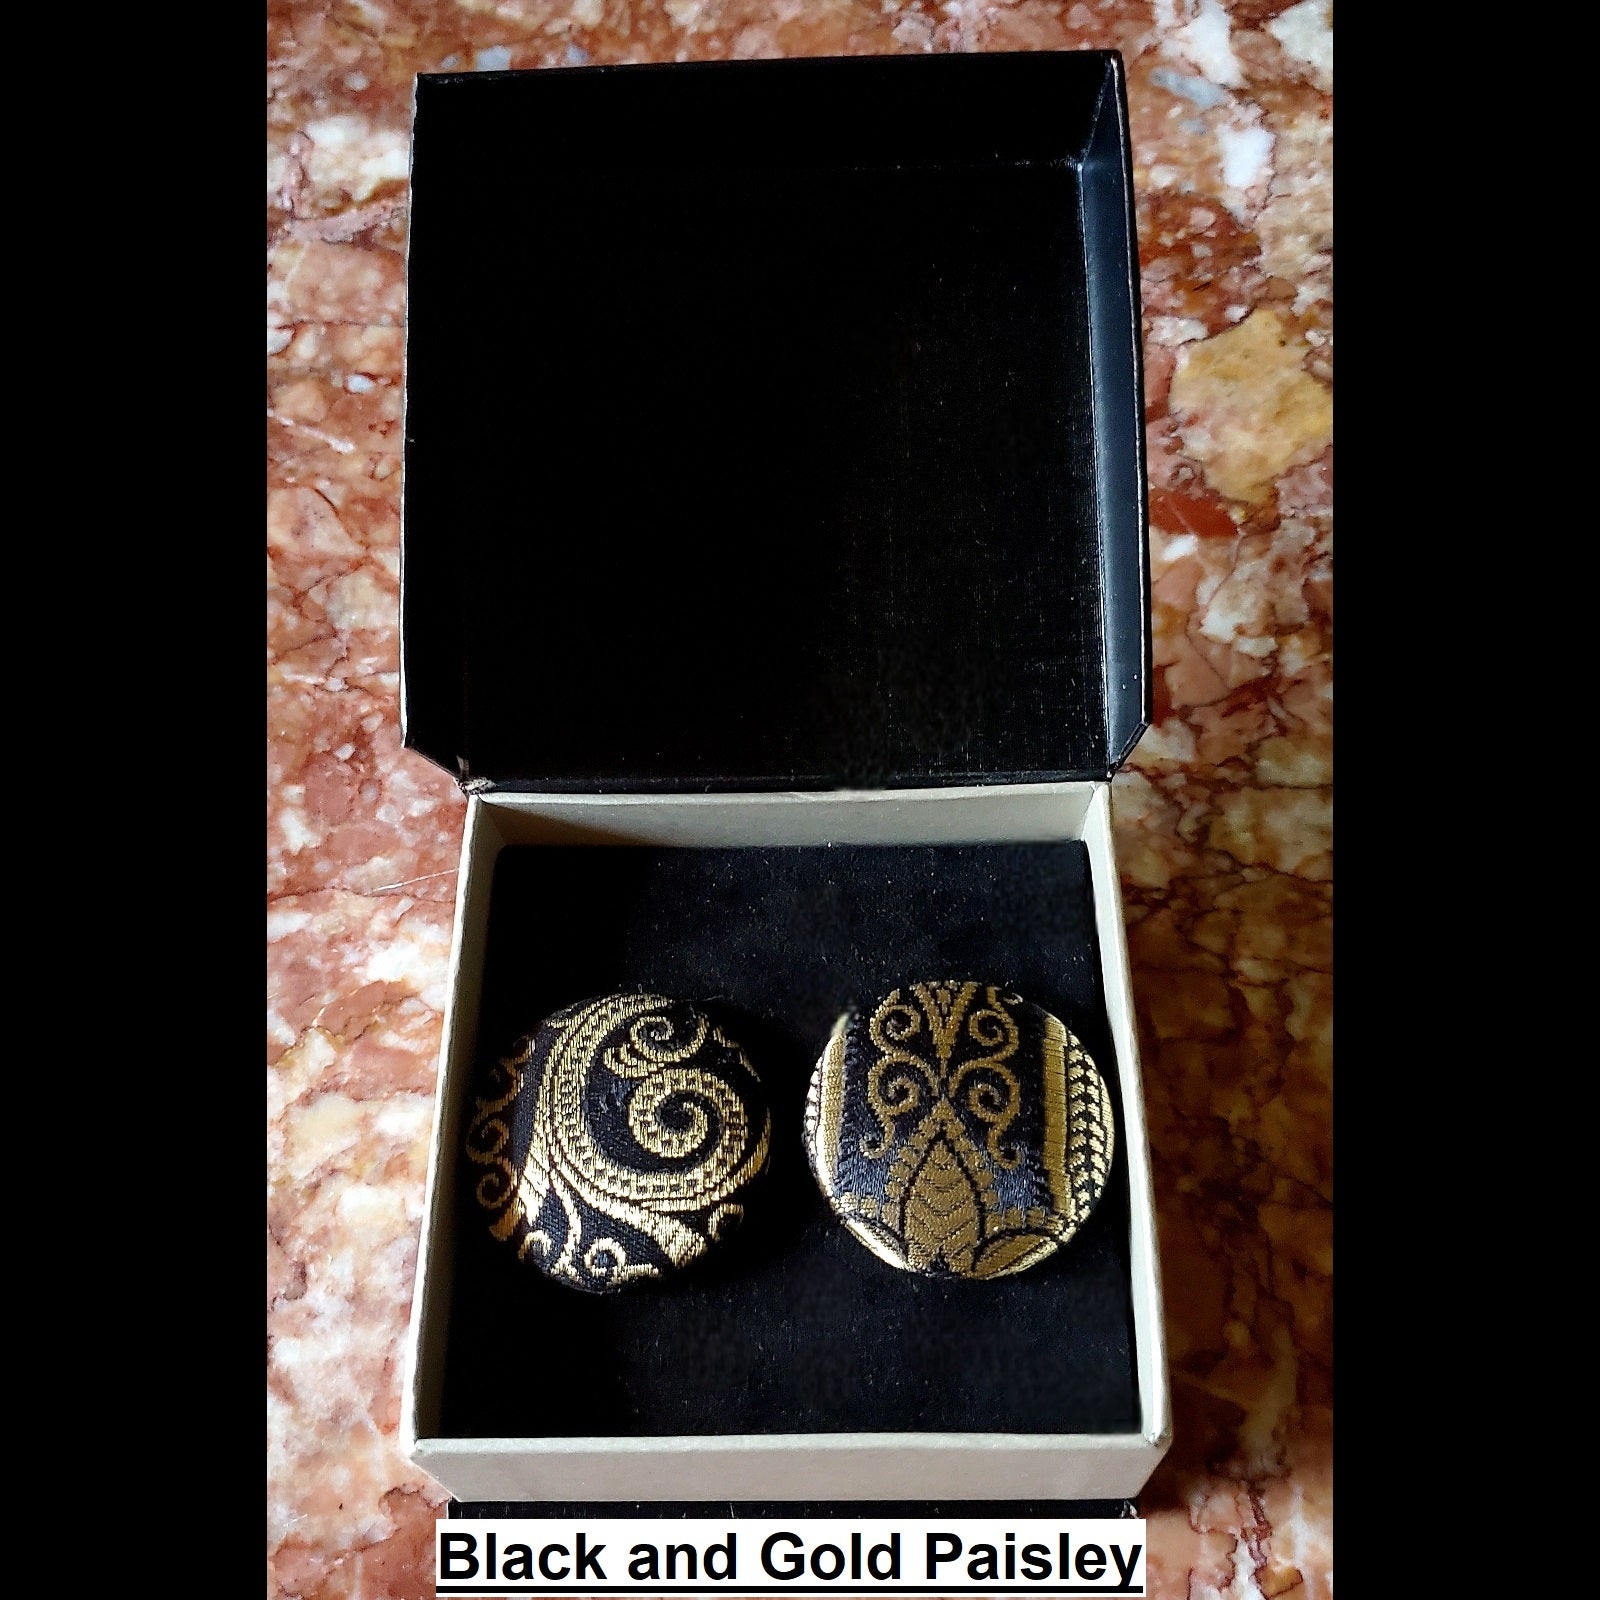 Black and gold paisley print button earrings in jewelry box